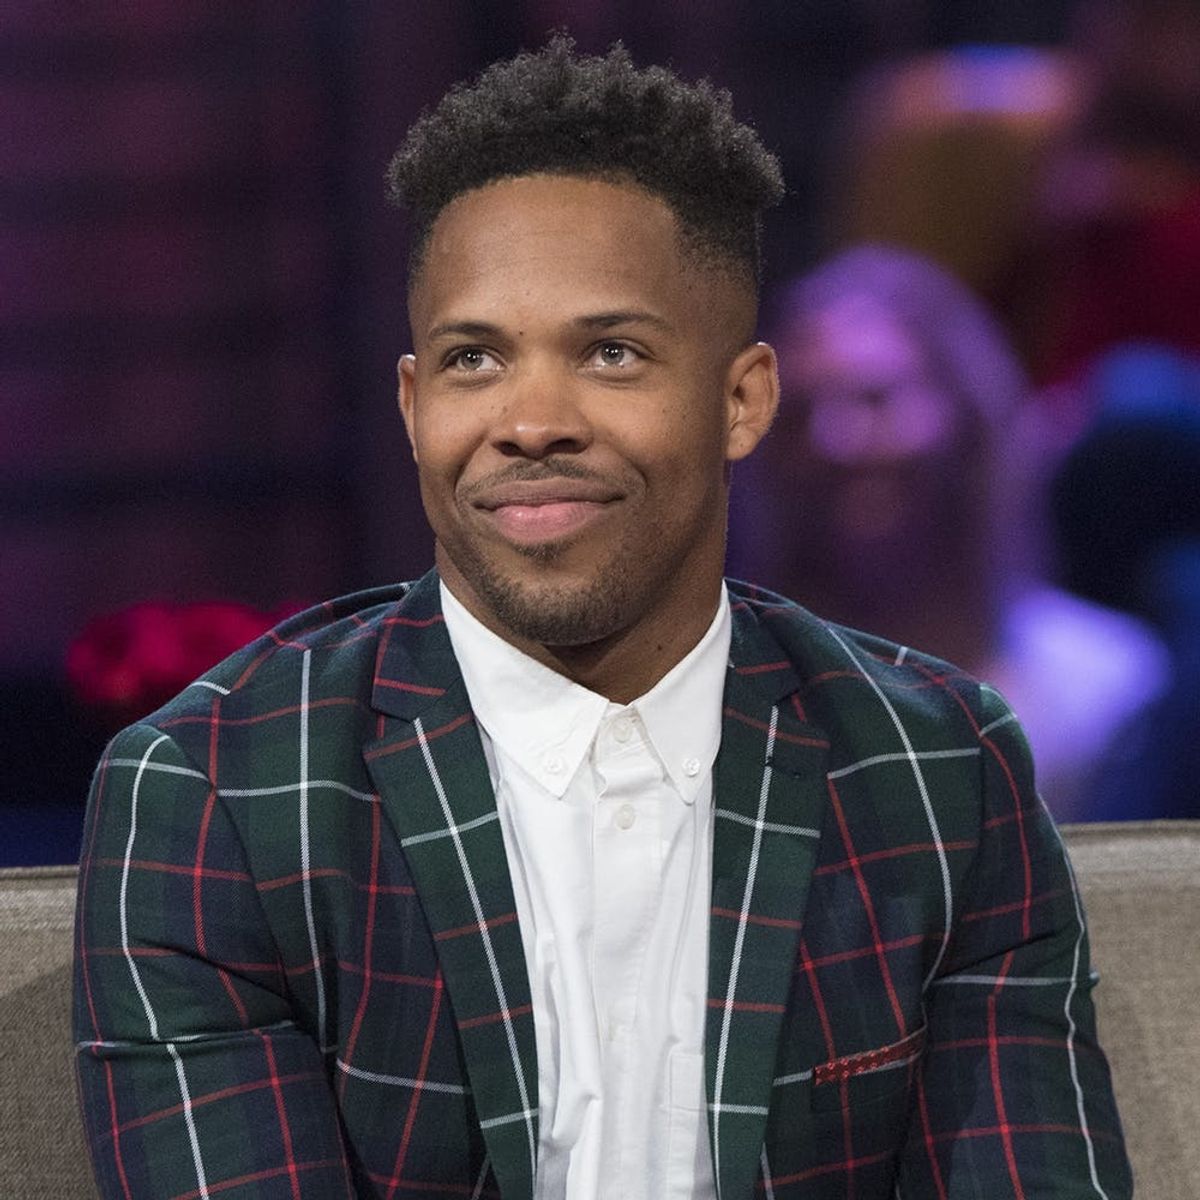 The Bachelorette’s Wills Reid Wants to Be the First Black Bachelor